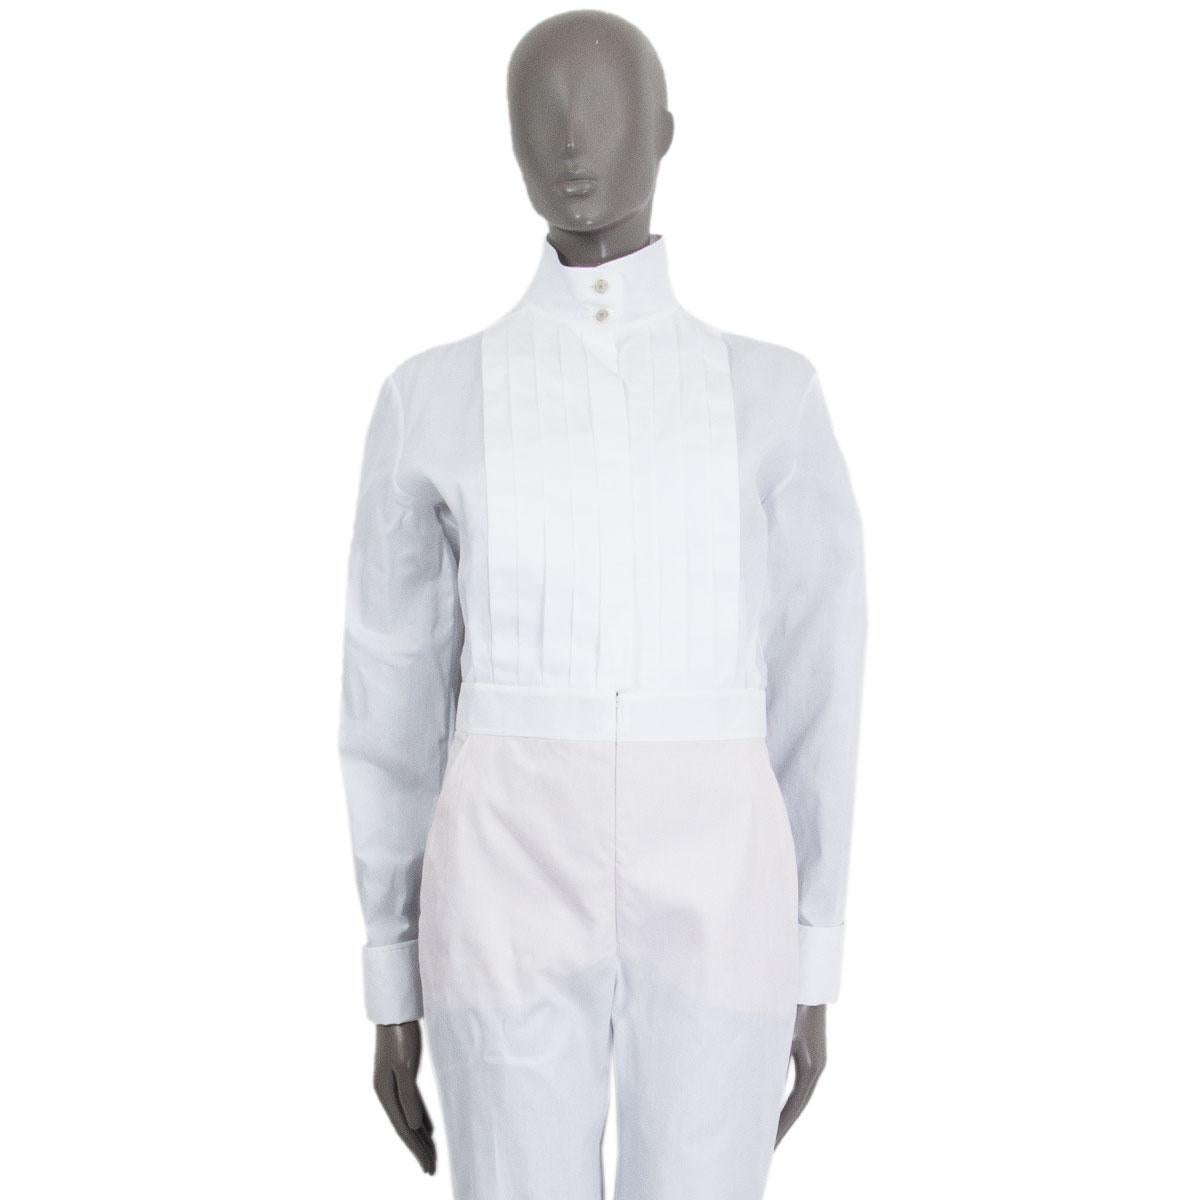 100% authentic Chanel fitted jumpsuit in white cotton (100%) with a front pleat, a band-collar, two side-pockets, knee-length shorts lined in a tan colored underwear. Closes in the front with a button fastening and a concealed zipper. Brand